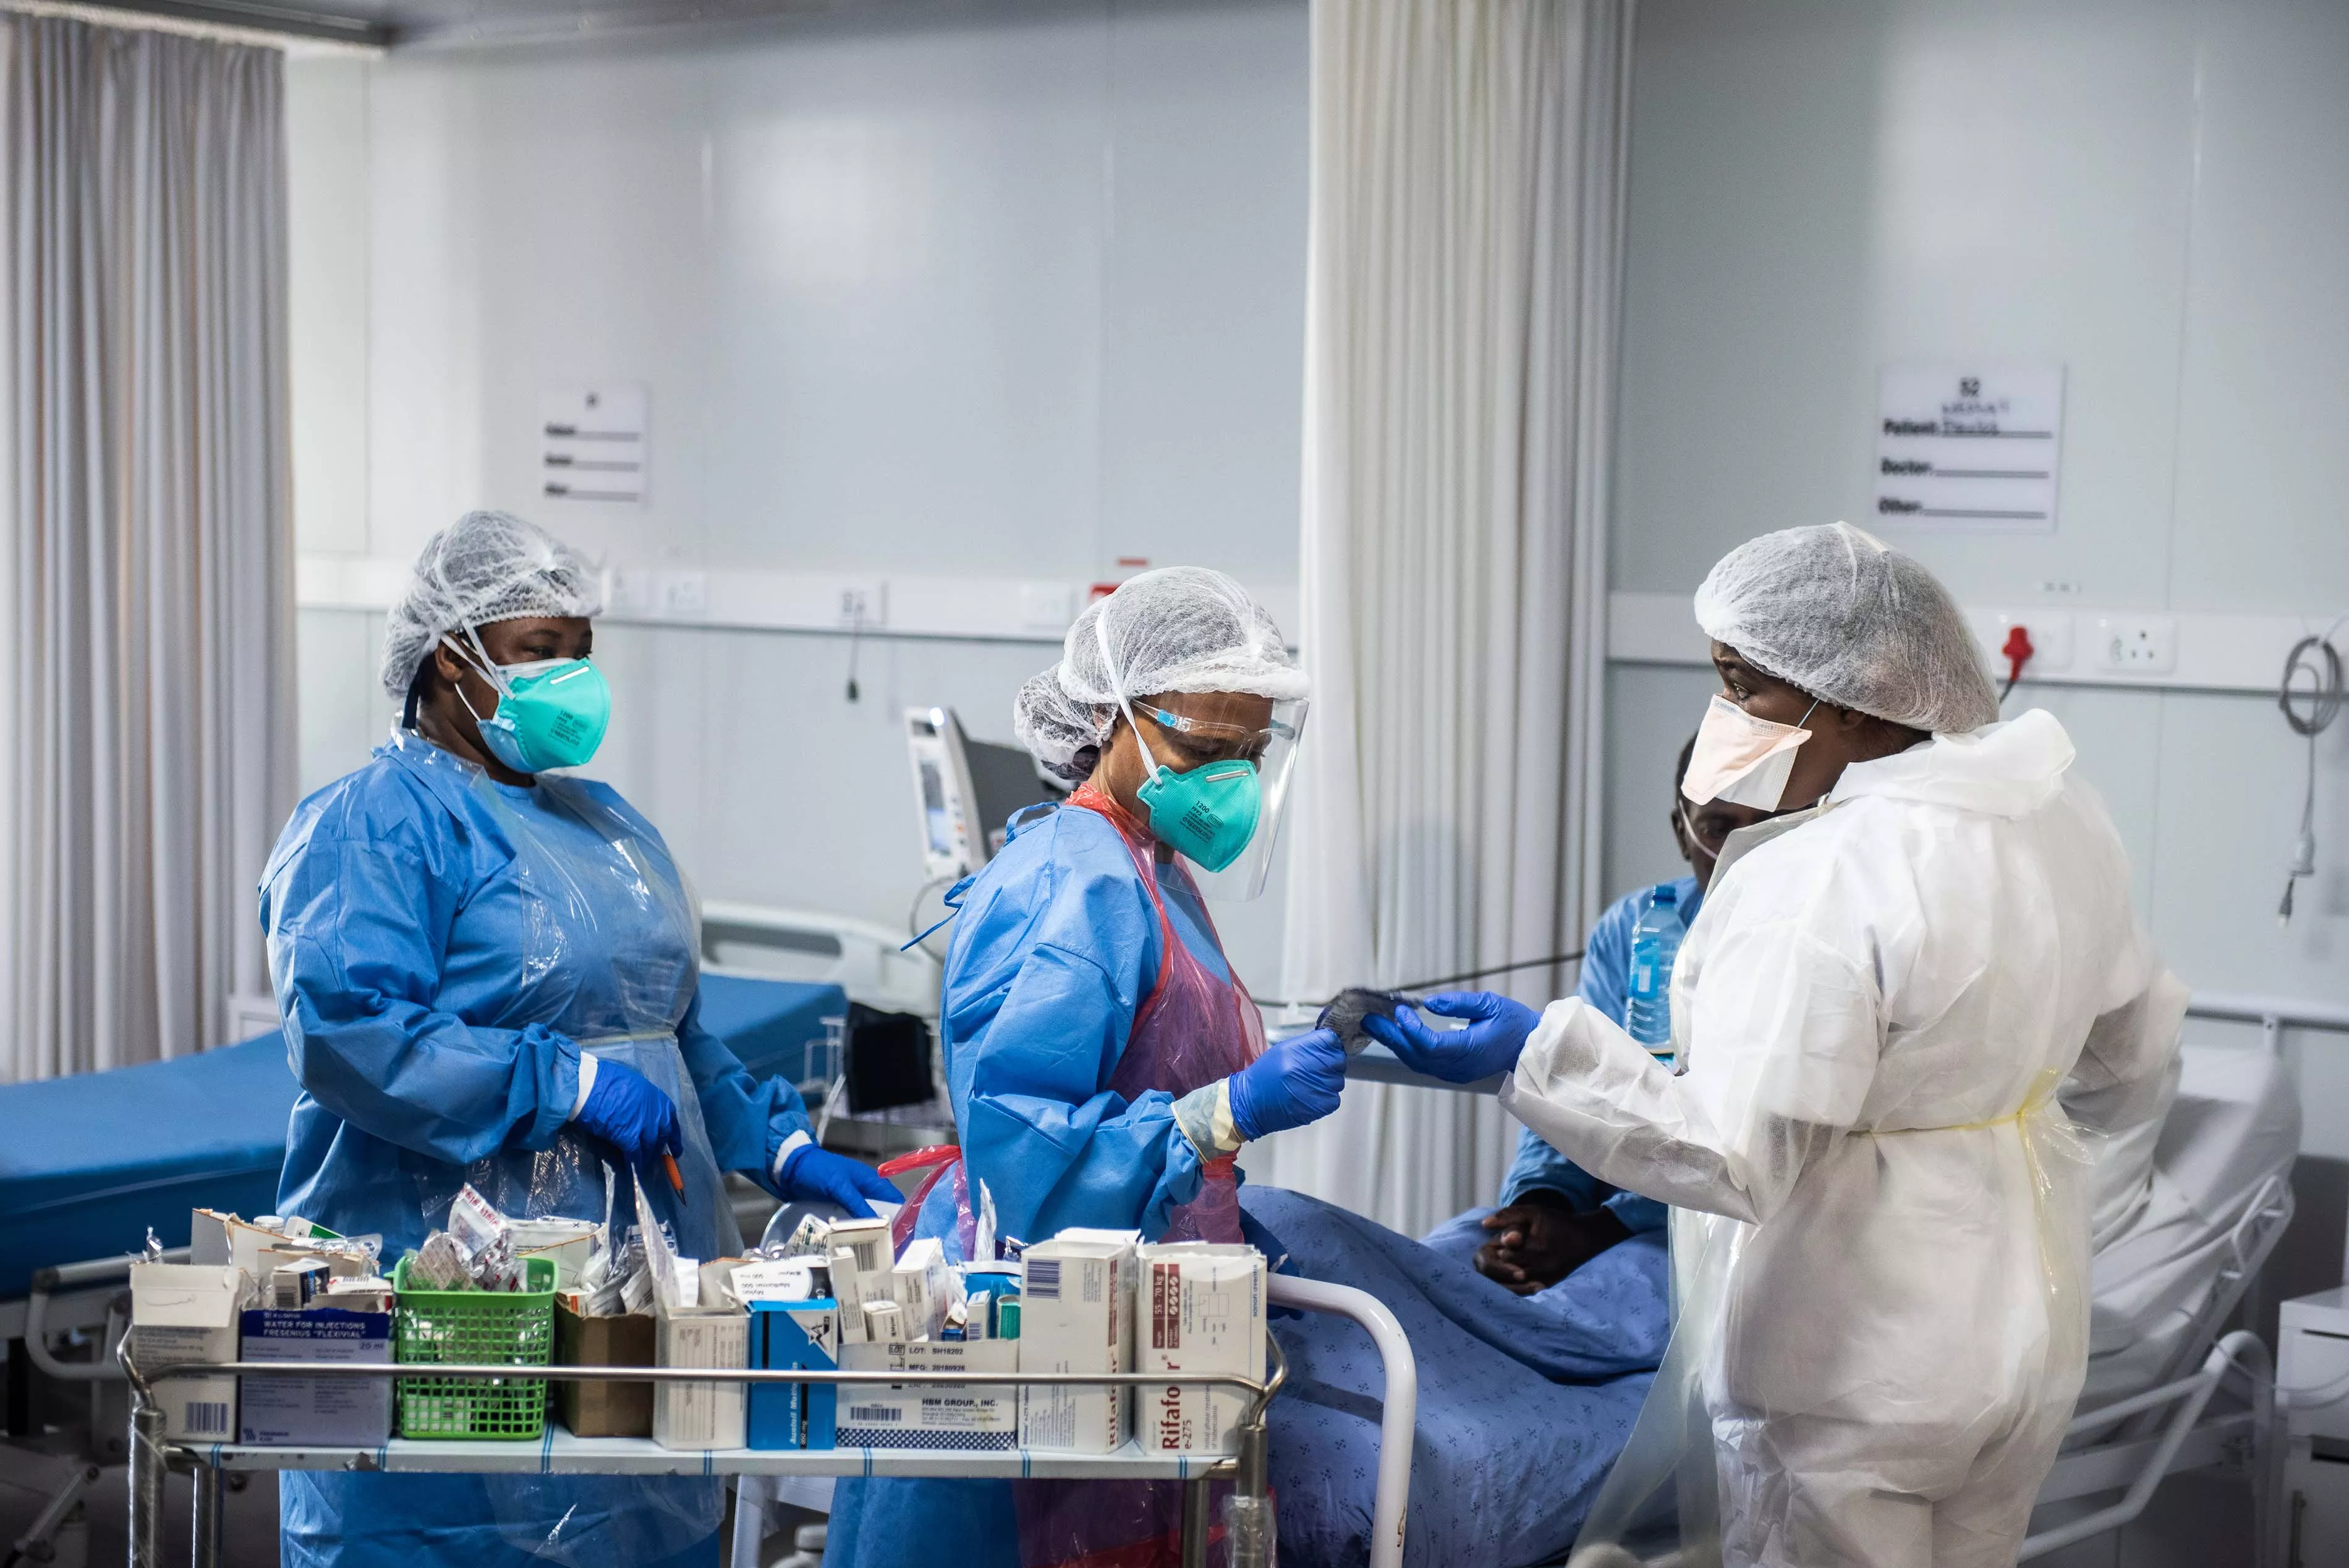 The rapid addition of inexperienced staff in an emergency situation, as happened in many hospitals during South Africa’s second COVID-19 wave, can produce challenges, which MSF witnessed first-hand in the field hospital at Ngwelezana Tertiary Hospital in northern KwaZulu-Natal. 